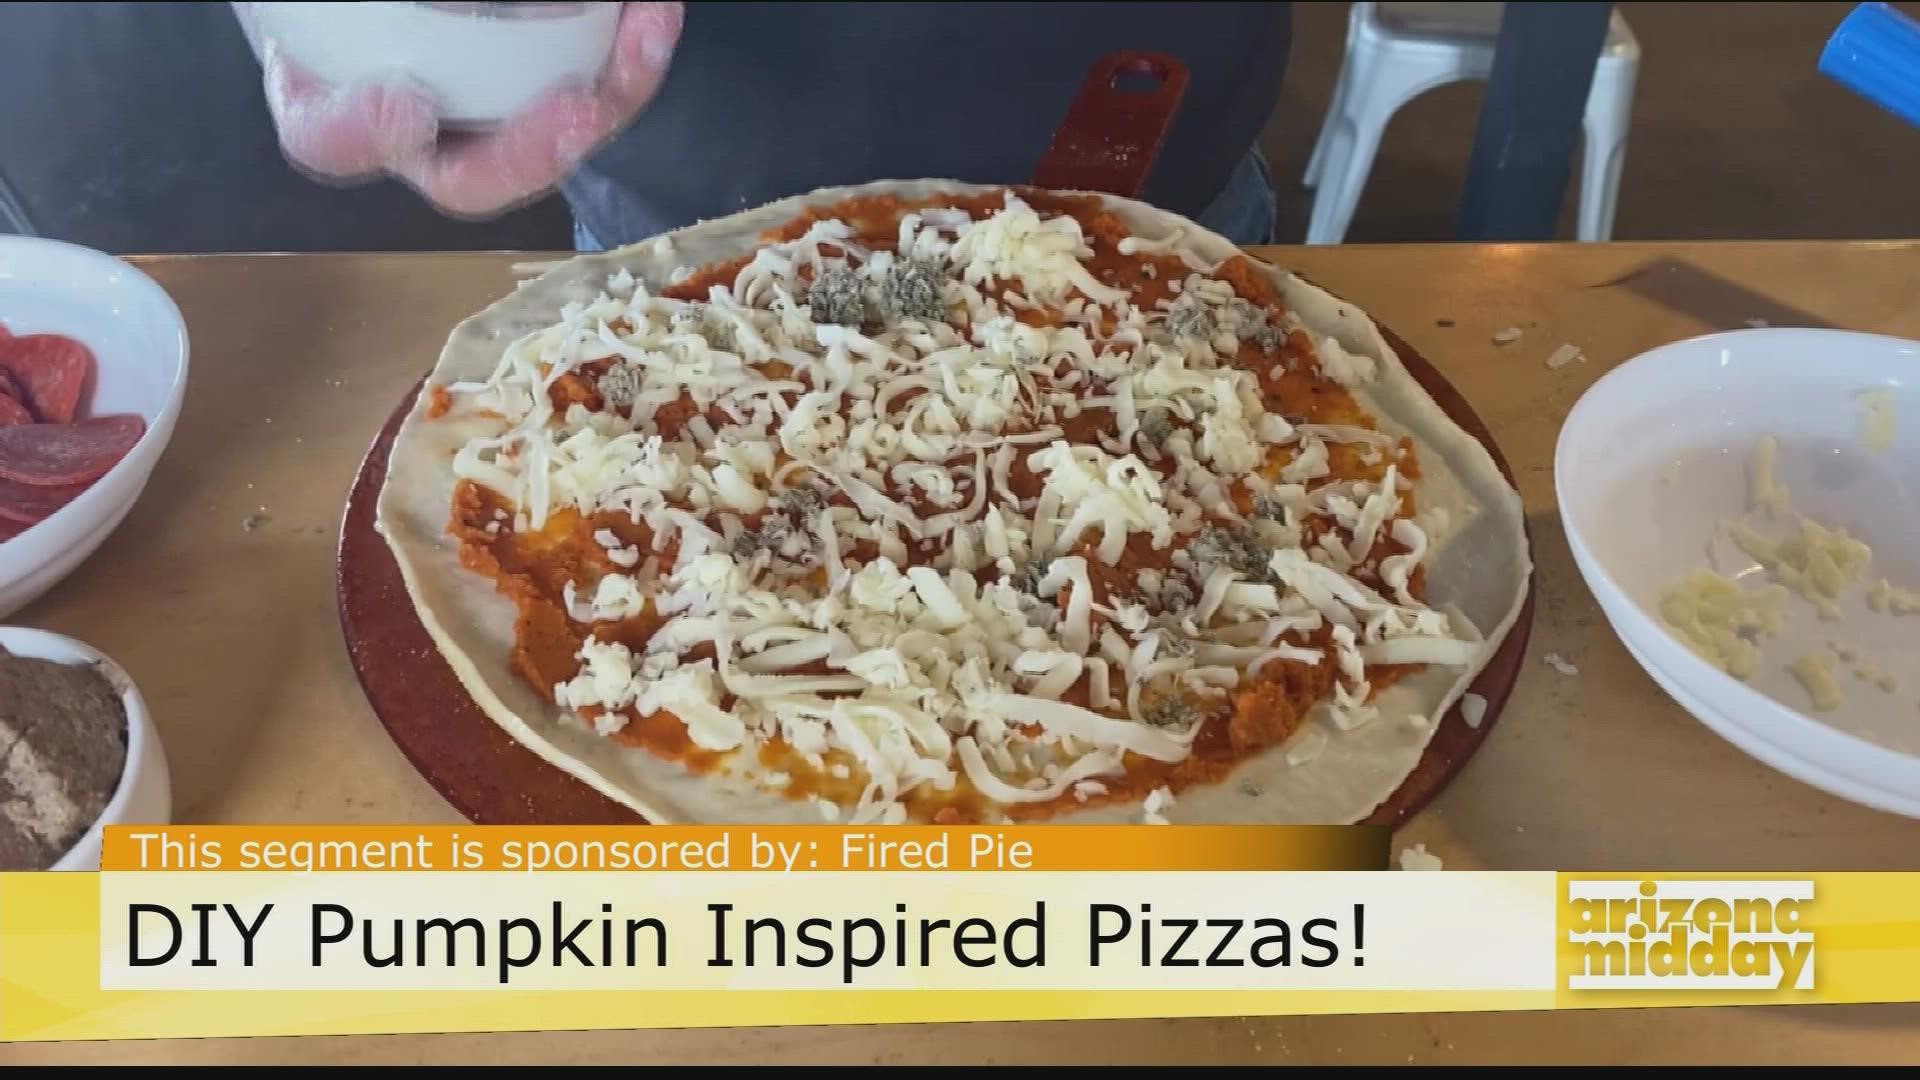 You may like pineapples on your pizza but have you ever tried a pumpkin sauce - check out Fired Pie's limited time pizza perfect for fall!